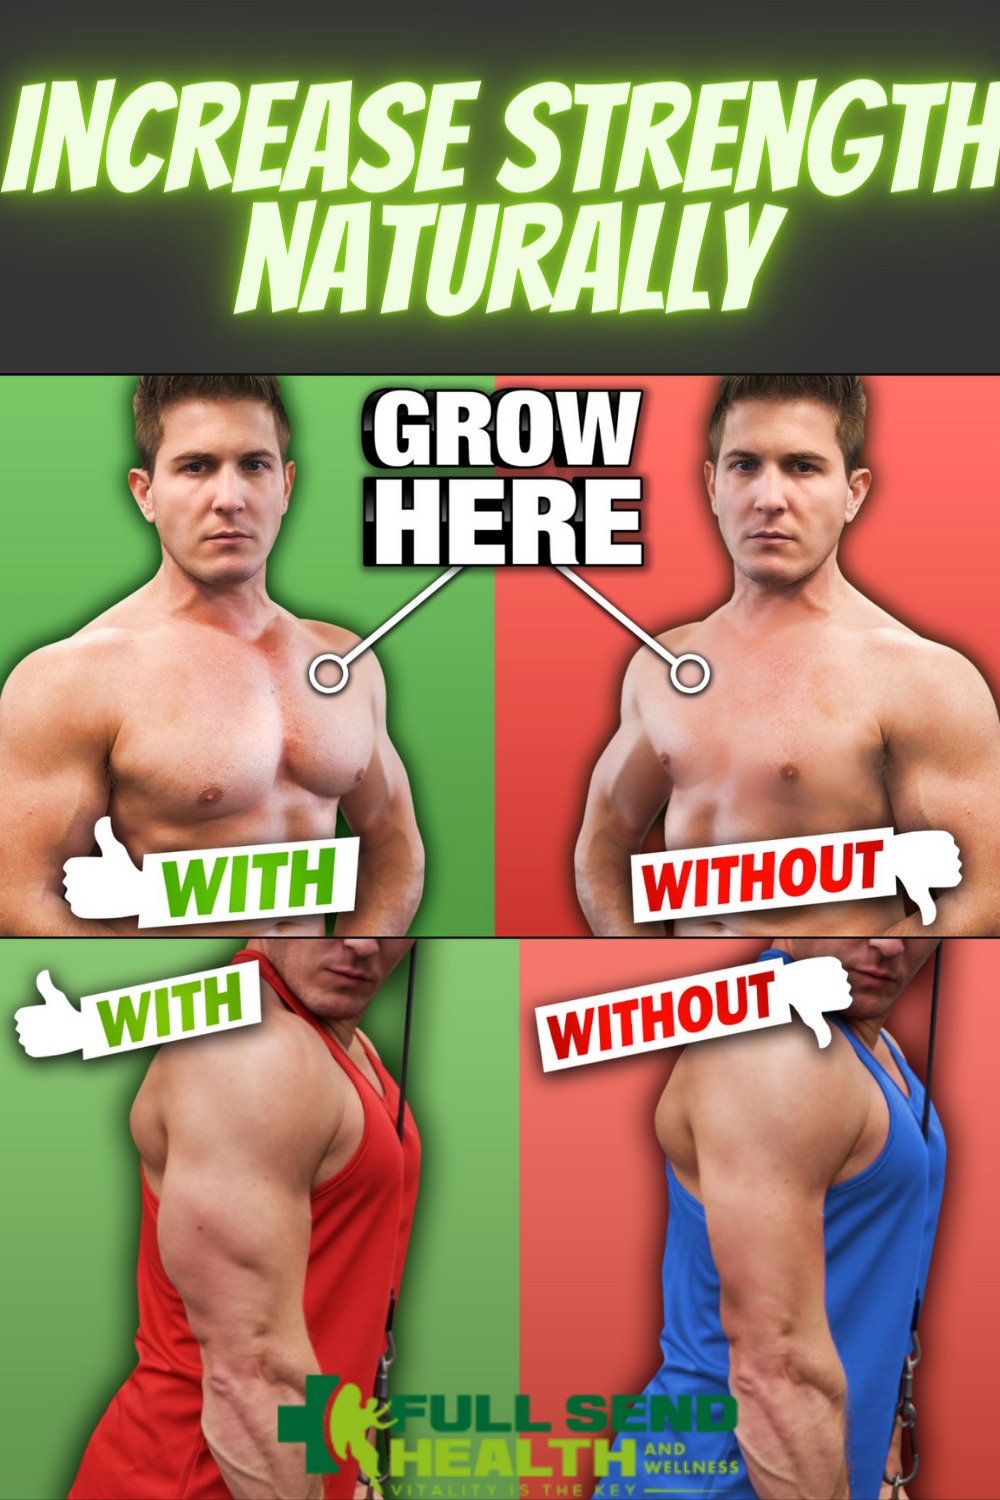 How to increase body strength naturally